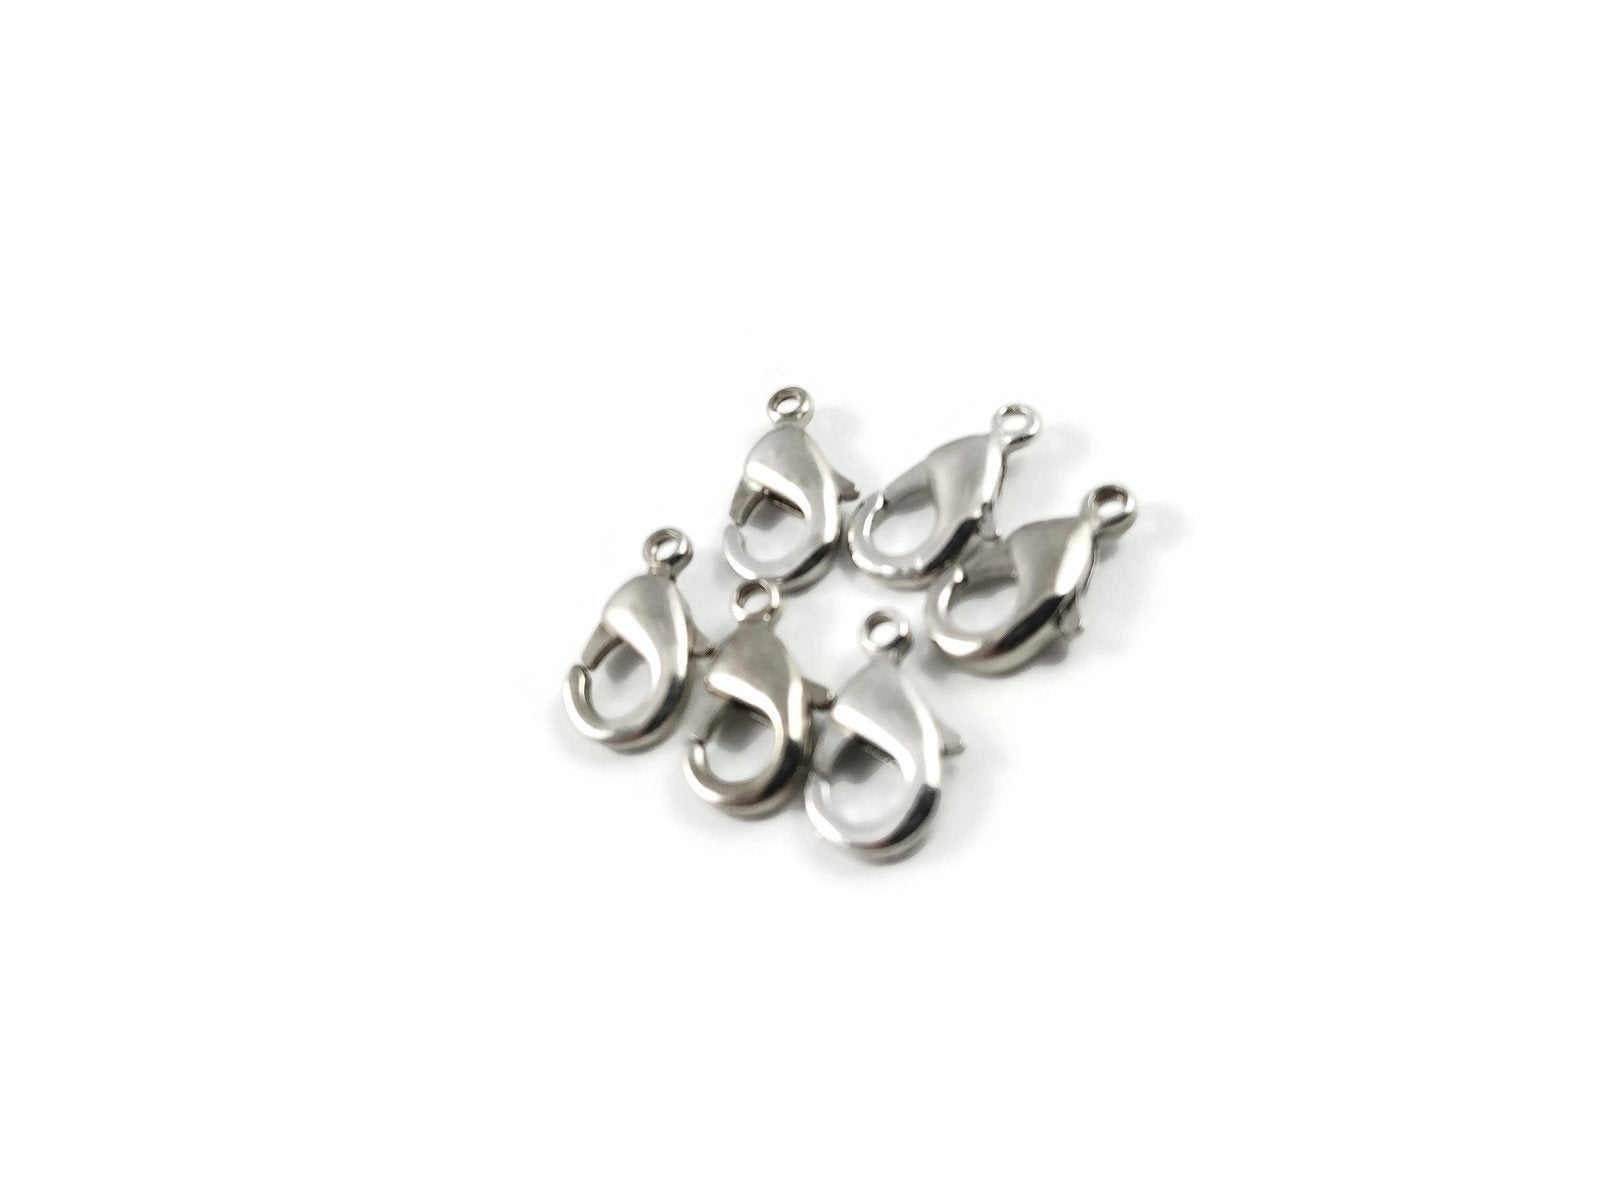 Brass lobster clasp hypoallergenic 12mm x 7mm - Nickel free, lead free and cadmium free - 5 colors available